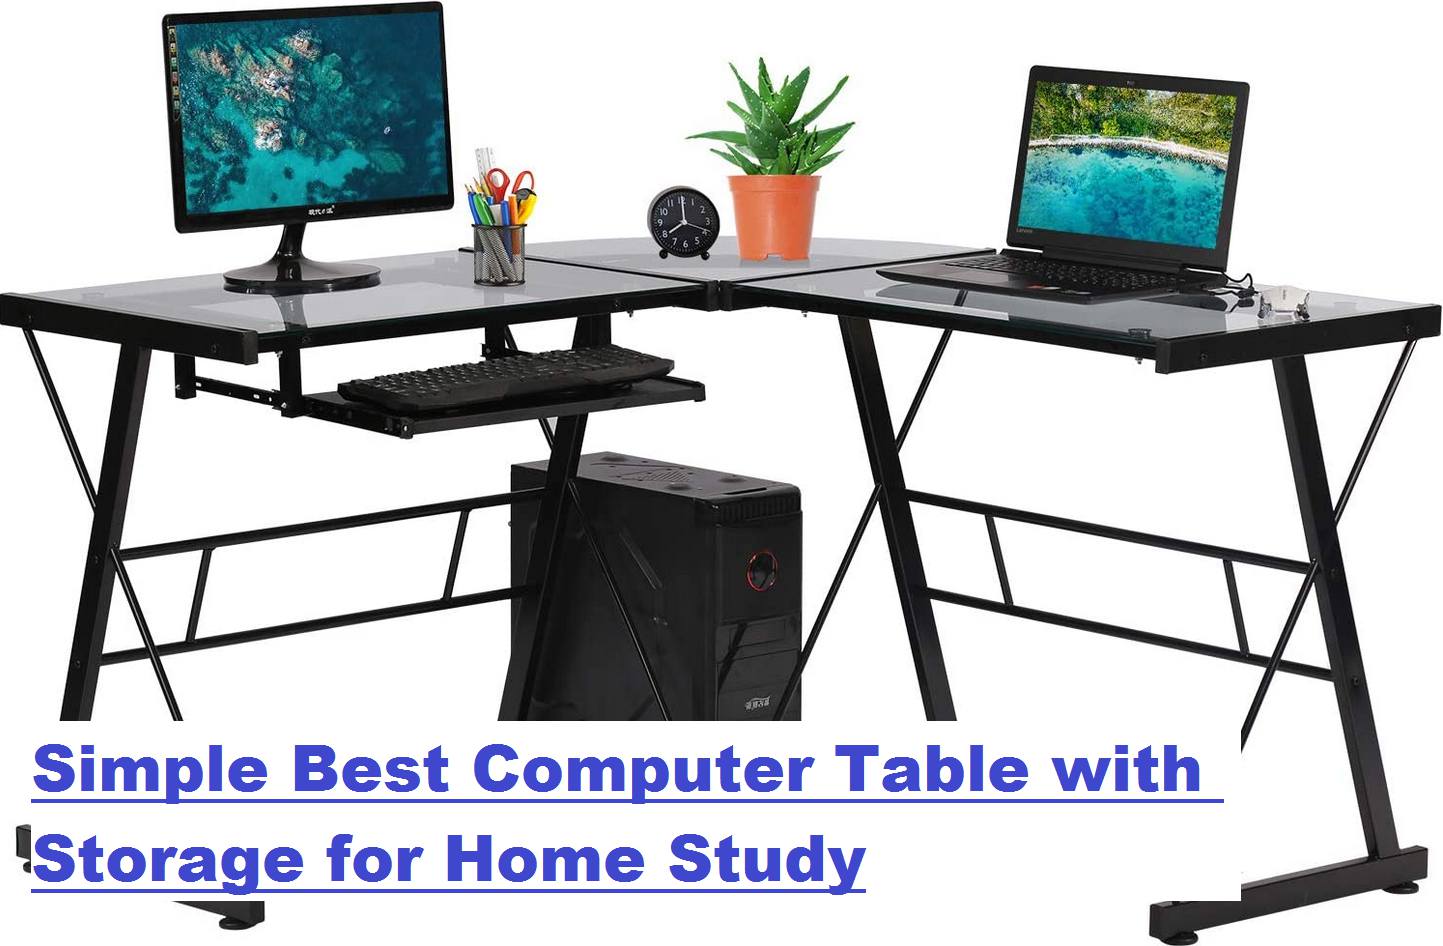 Simple Best Computer Table with Storage for Home Study